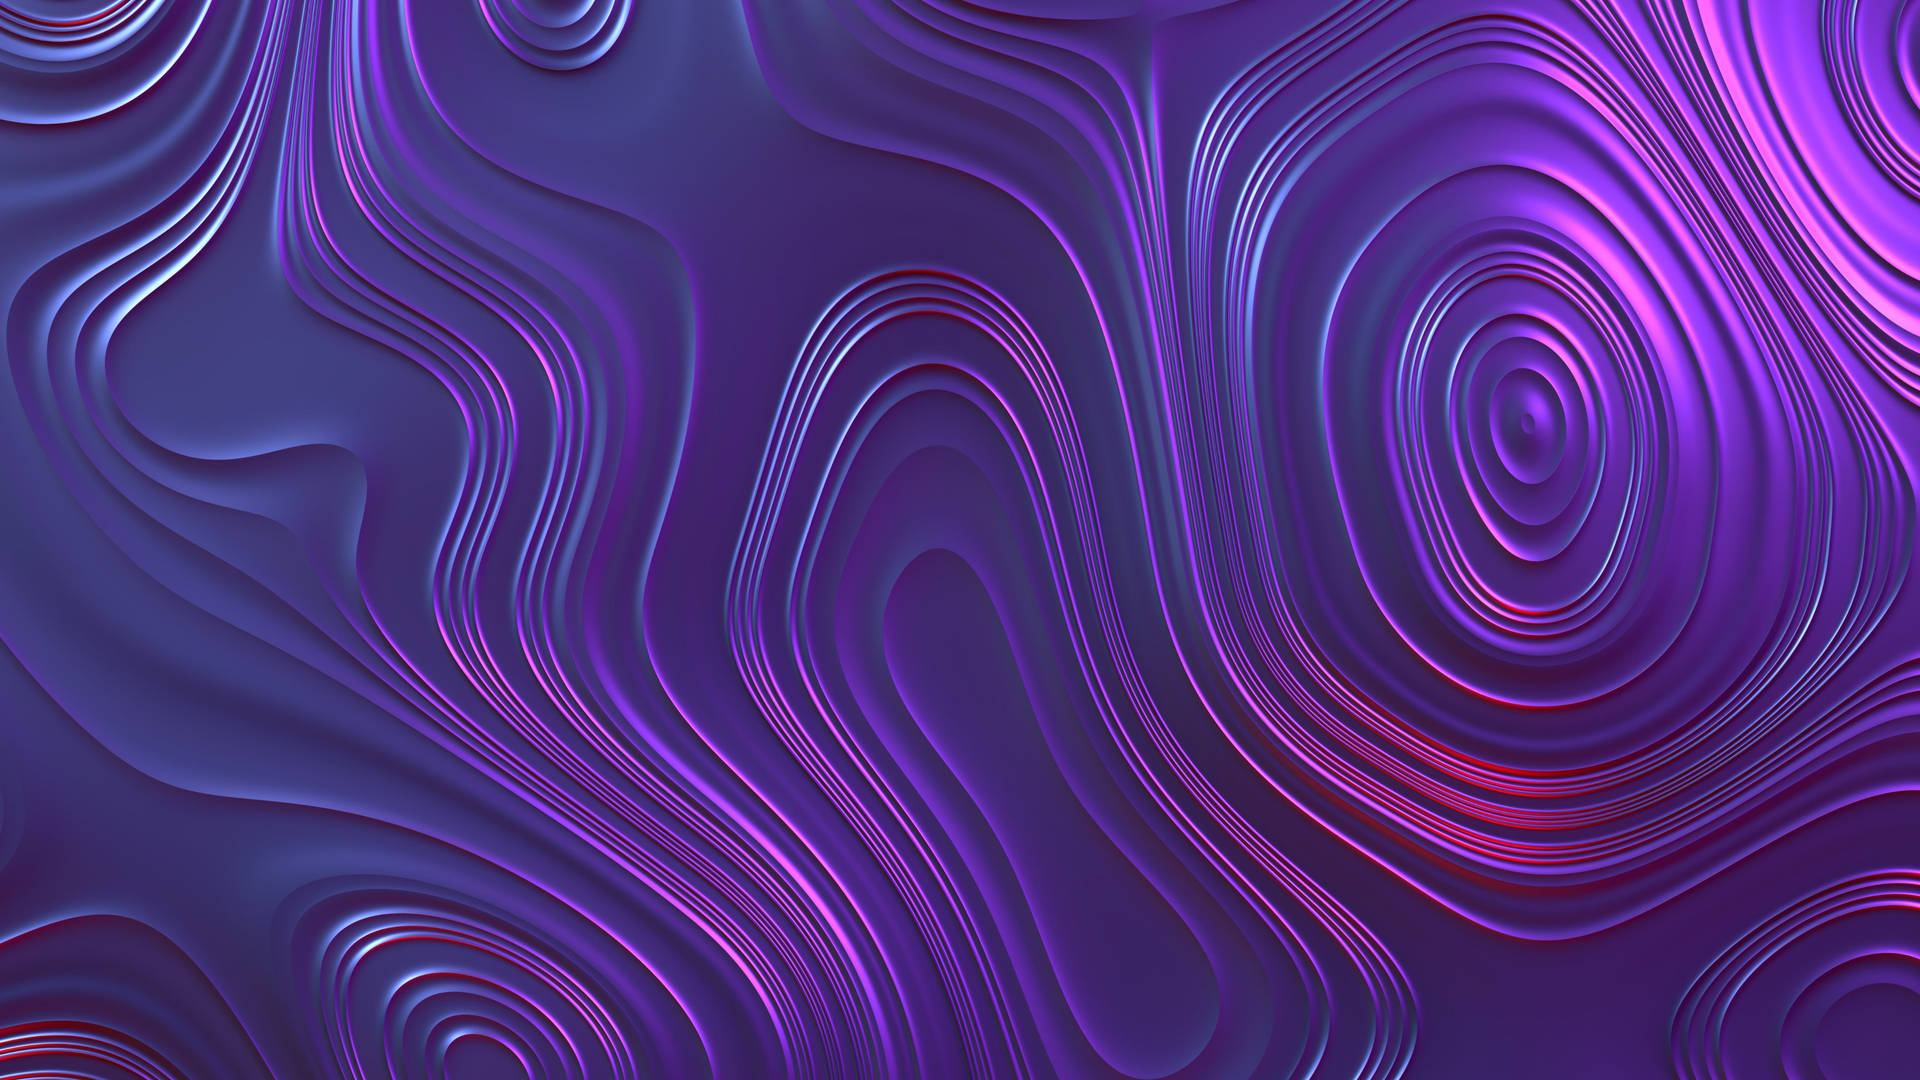 Violet Aesthetic Oval Waves Abstract Wallpaper